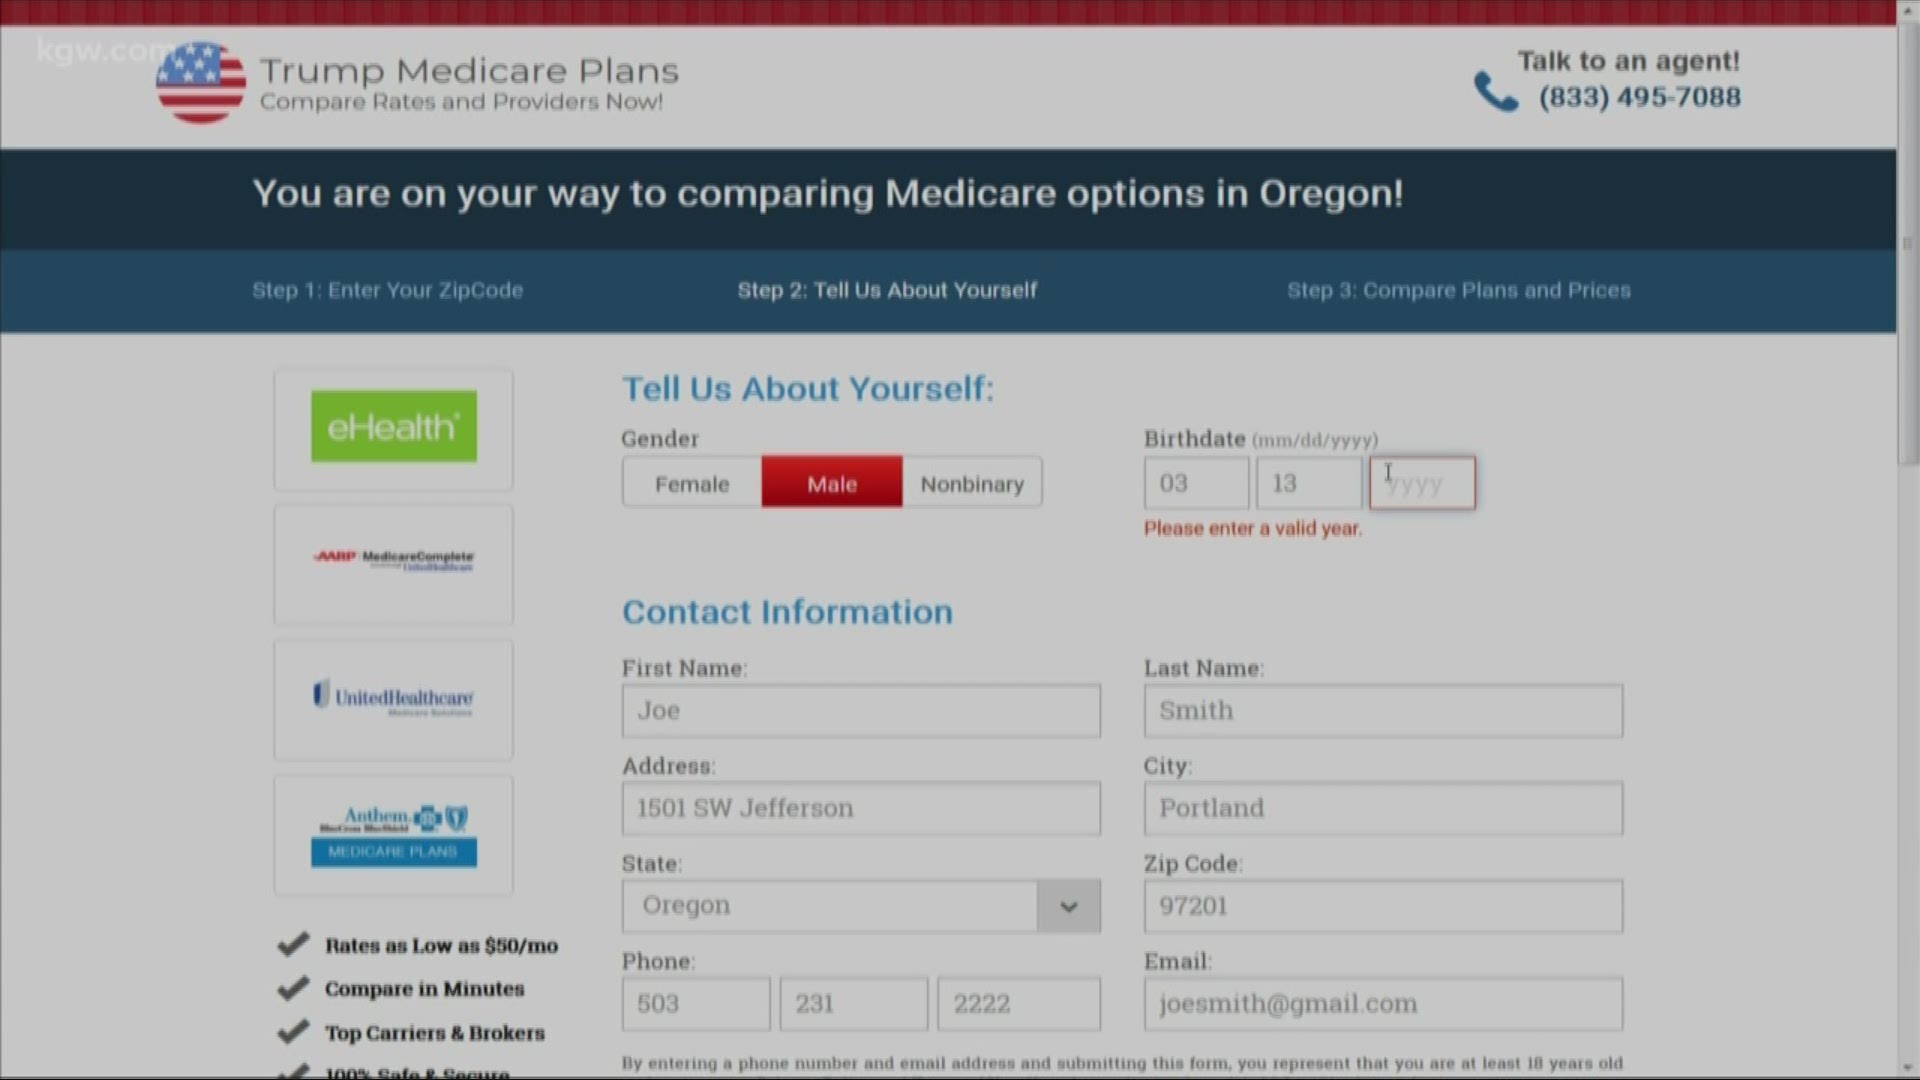 A website billing itself as the "Trump Medicare Plan" was sent out in an email to some people in Portland and across the country just weeks before the open enrollment deadline in early December. We wanted to Verify: Is the website affiliated with the pres